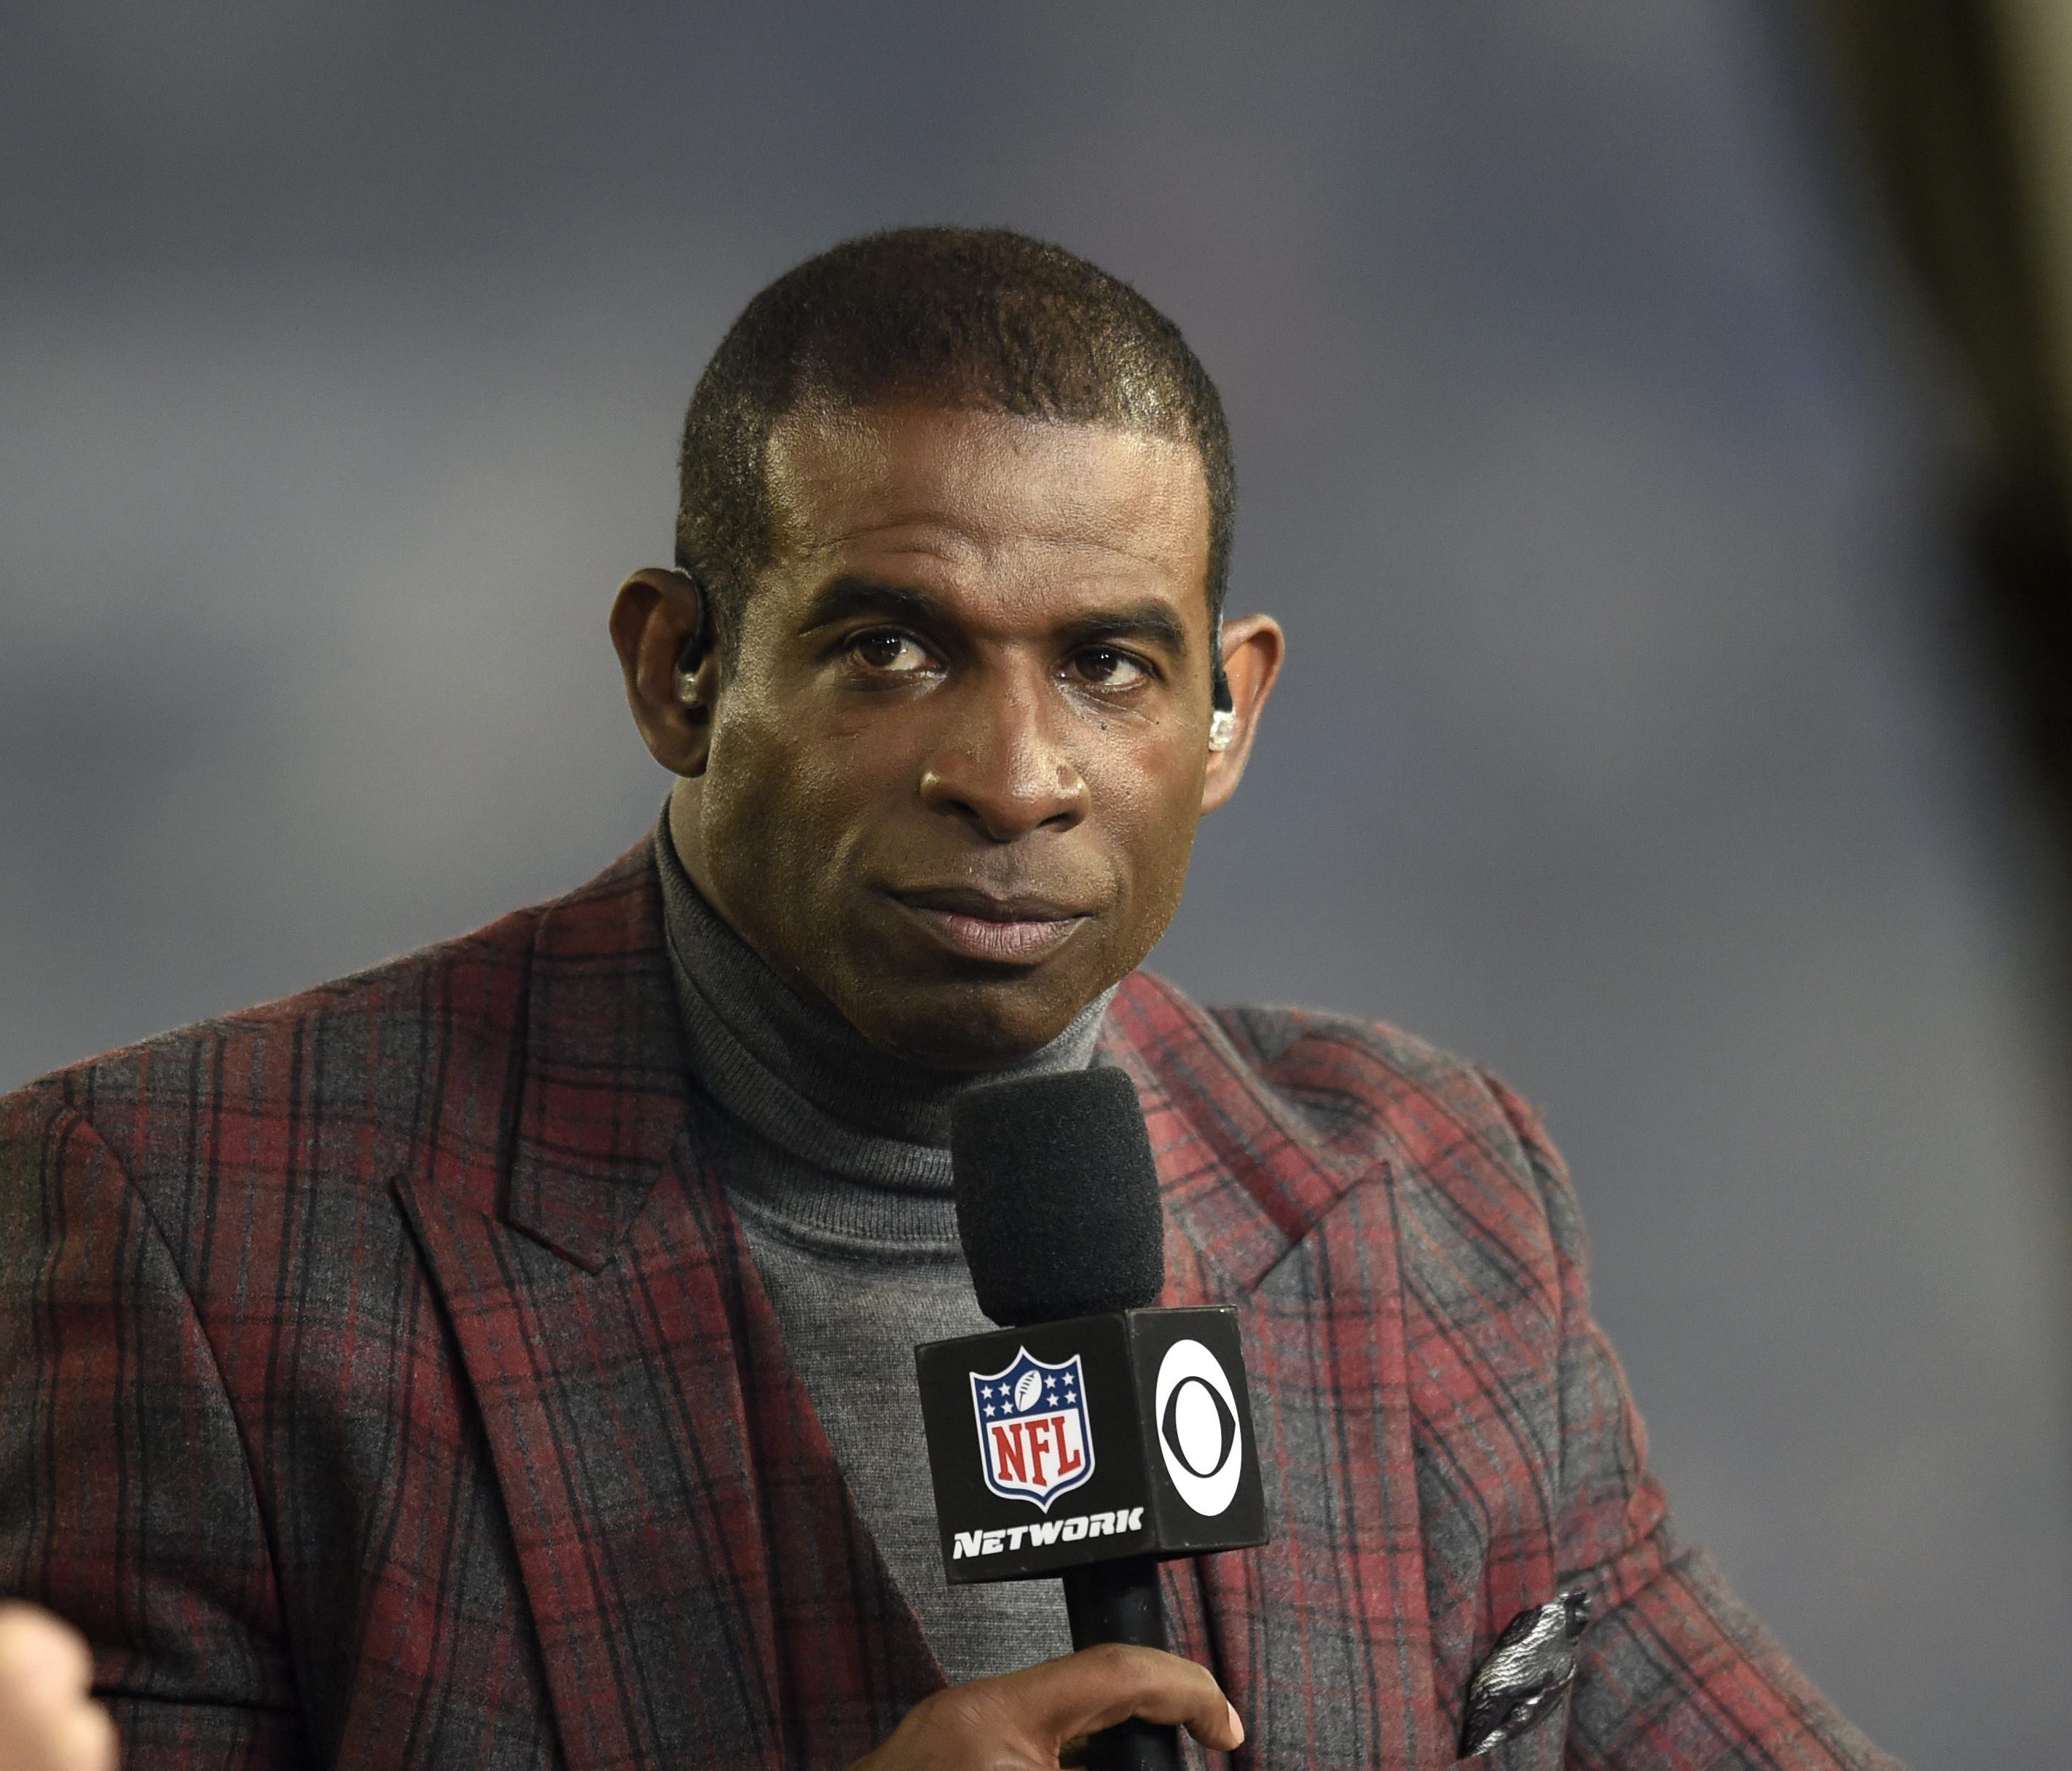 Deion Sanders speaks on the Thursday Night Football set during halftime in an NFL football game between the Baltimore Ravens and the Miami Dolphins, Thursday, Oct. 26, 2017, in Baltimore. (AP Photo/Gail Burton) ORG XMIT: OTK